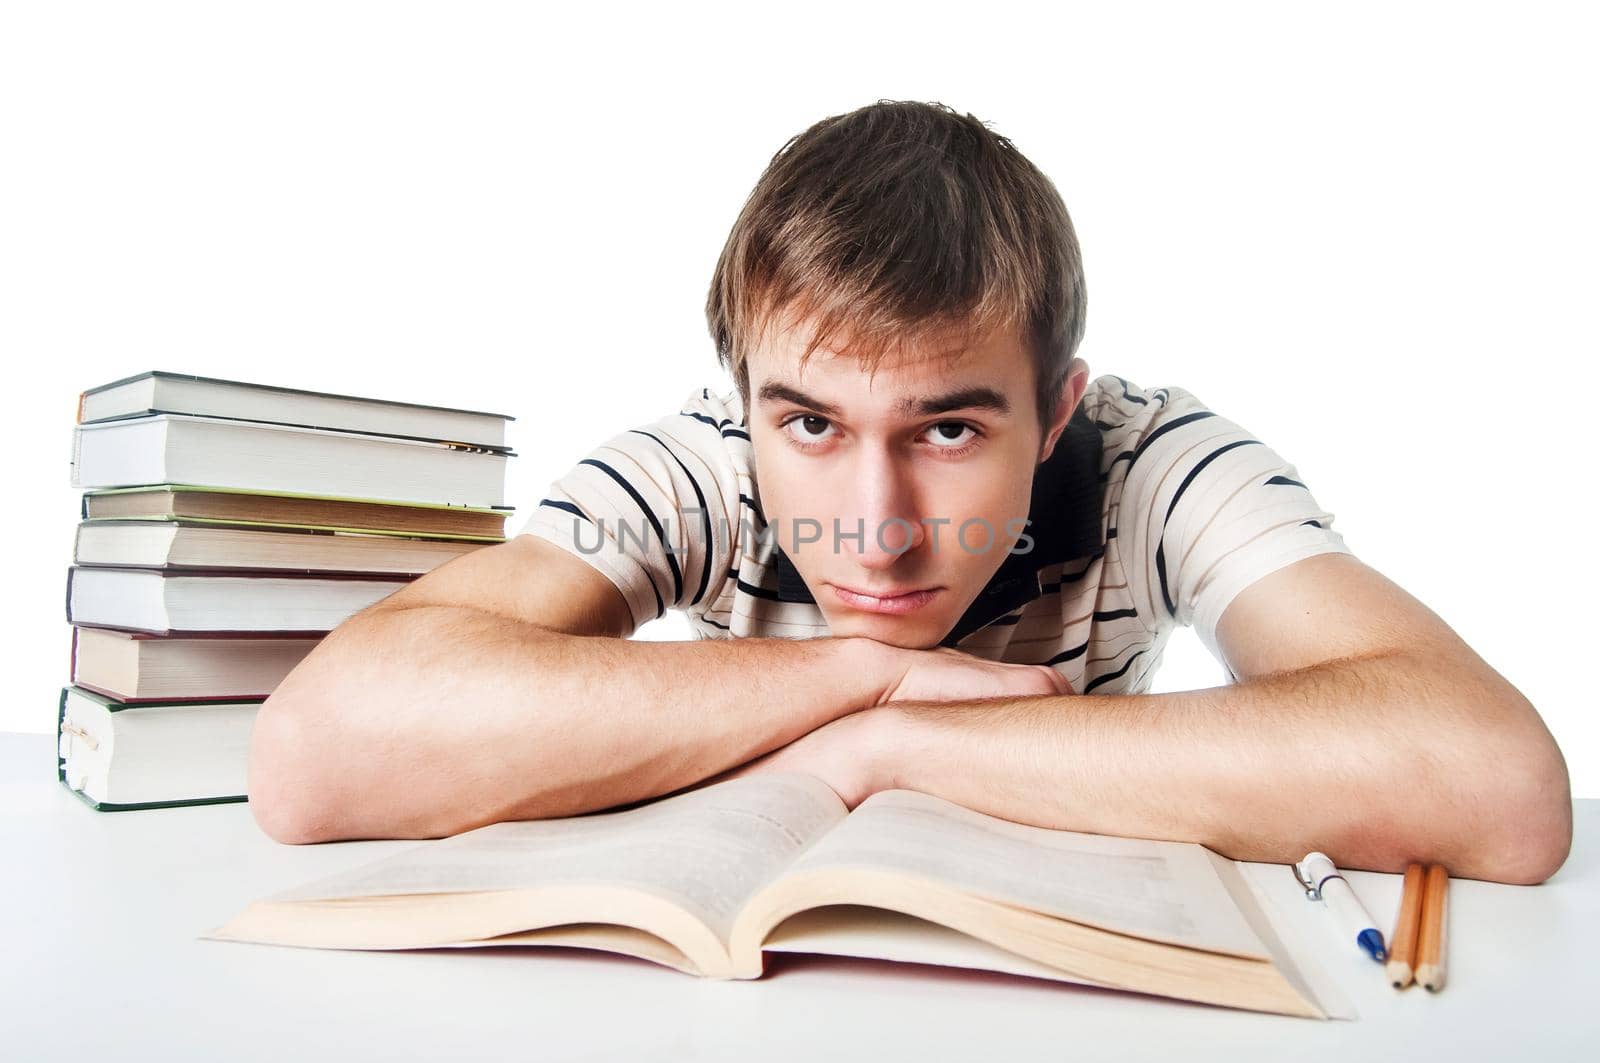 Male student at the table with a pile of books over white